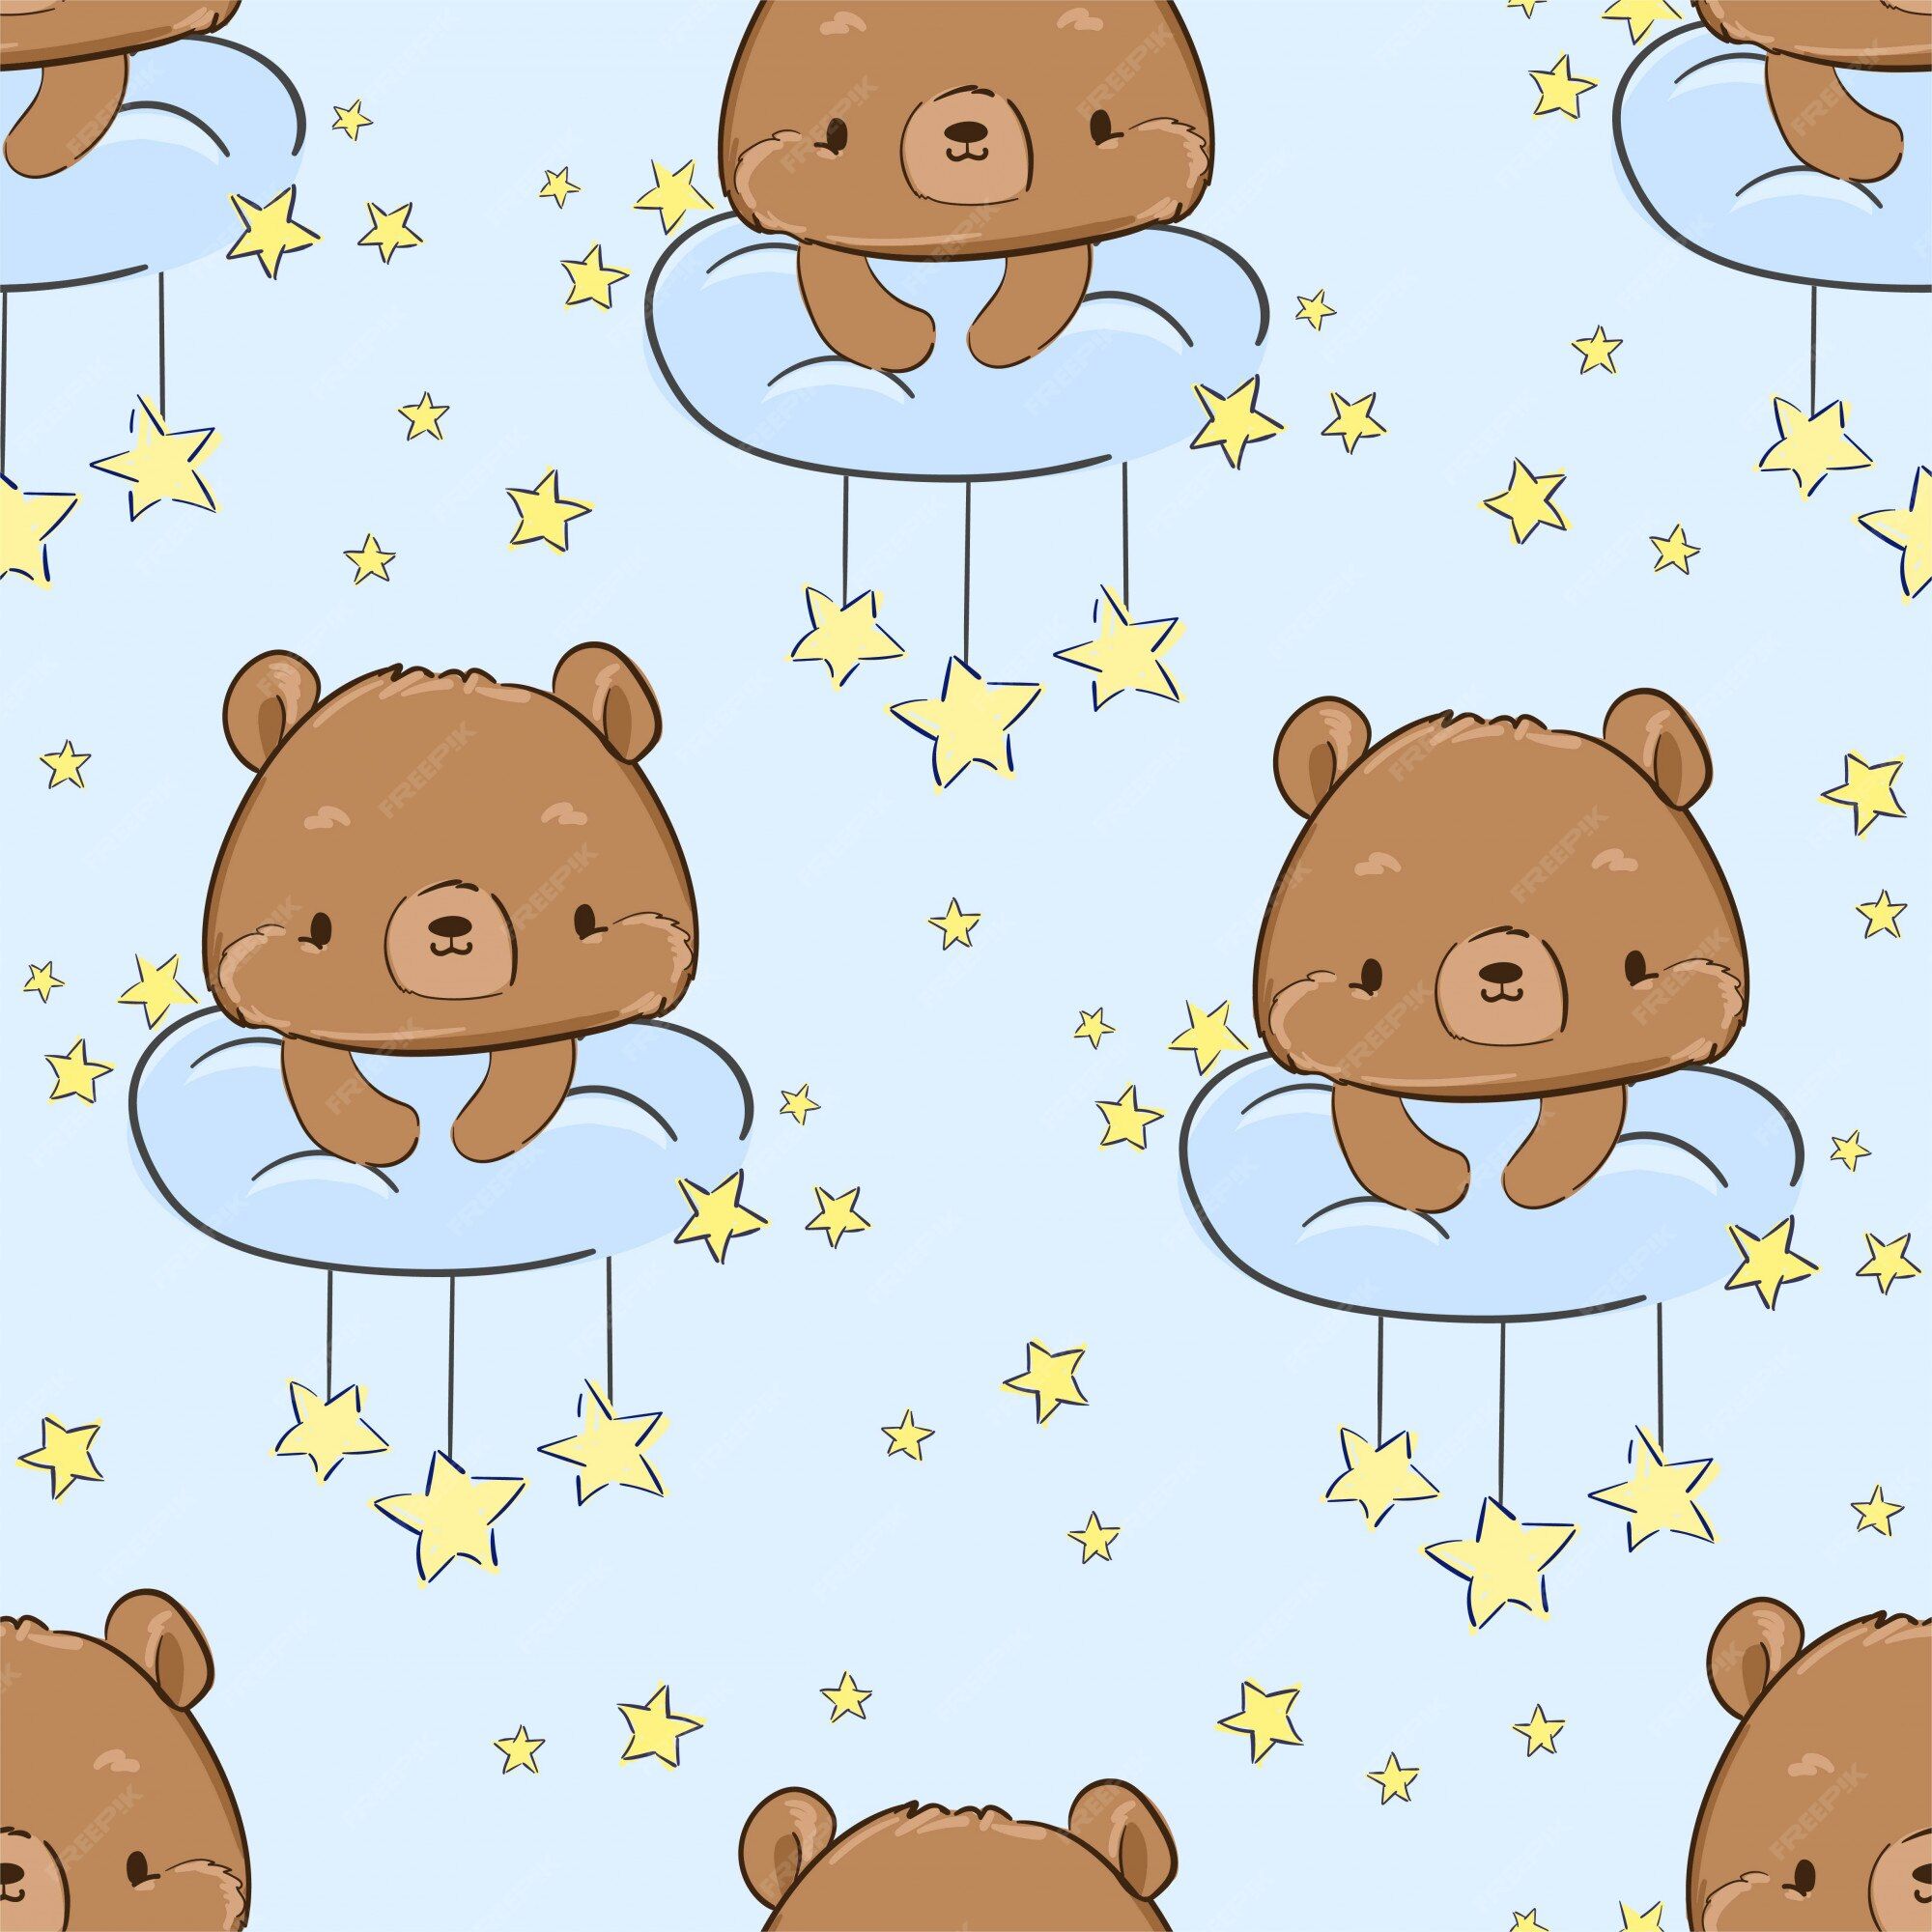 Premium Vector. Cute teddy bear sitting on a cloud and stars pattern seamless. illustration. textile design for children